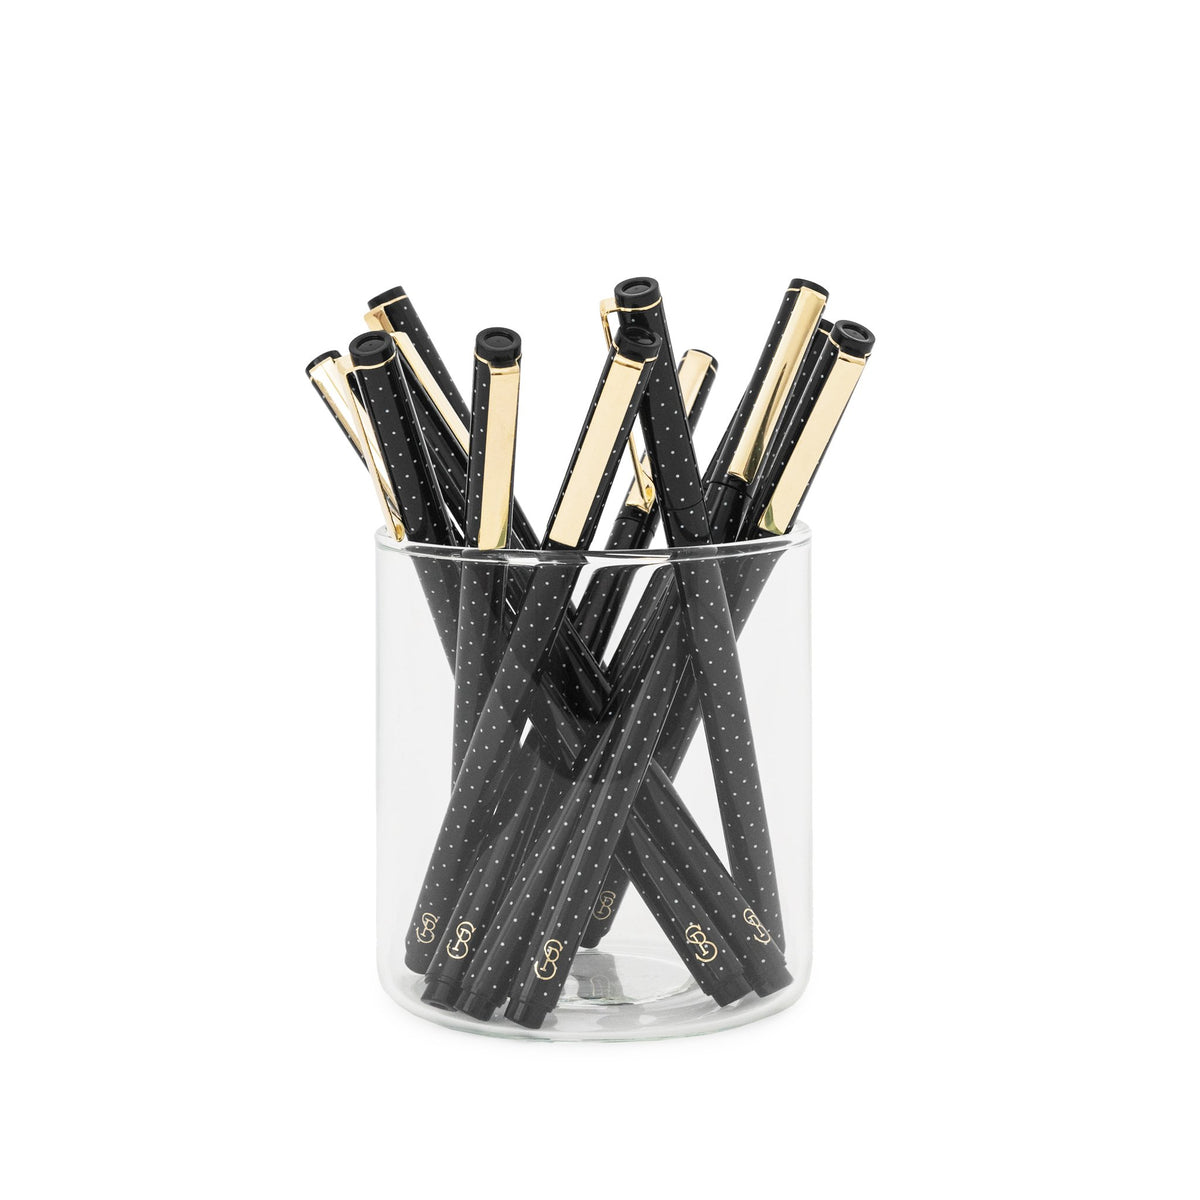 Black and white dot felt pens in glass cup